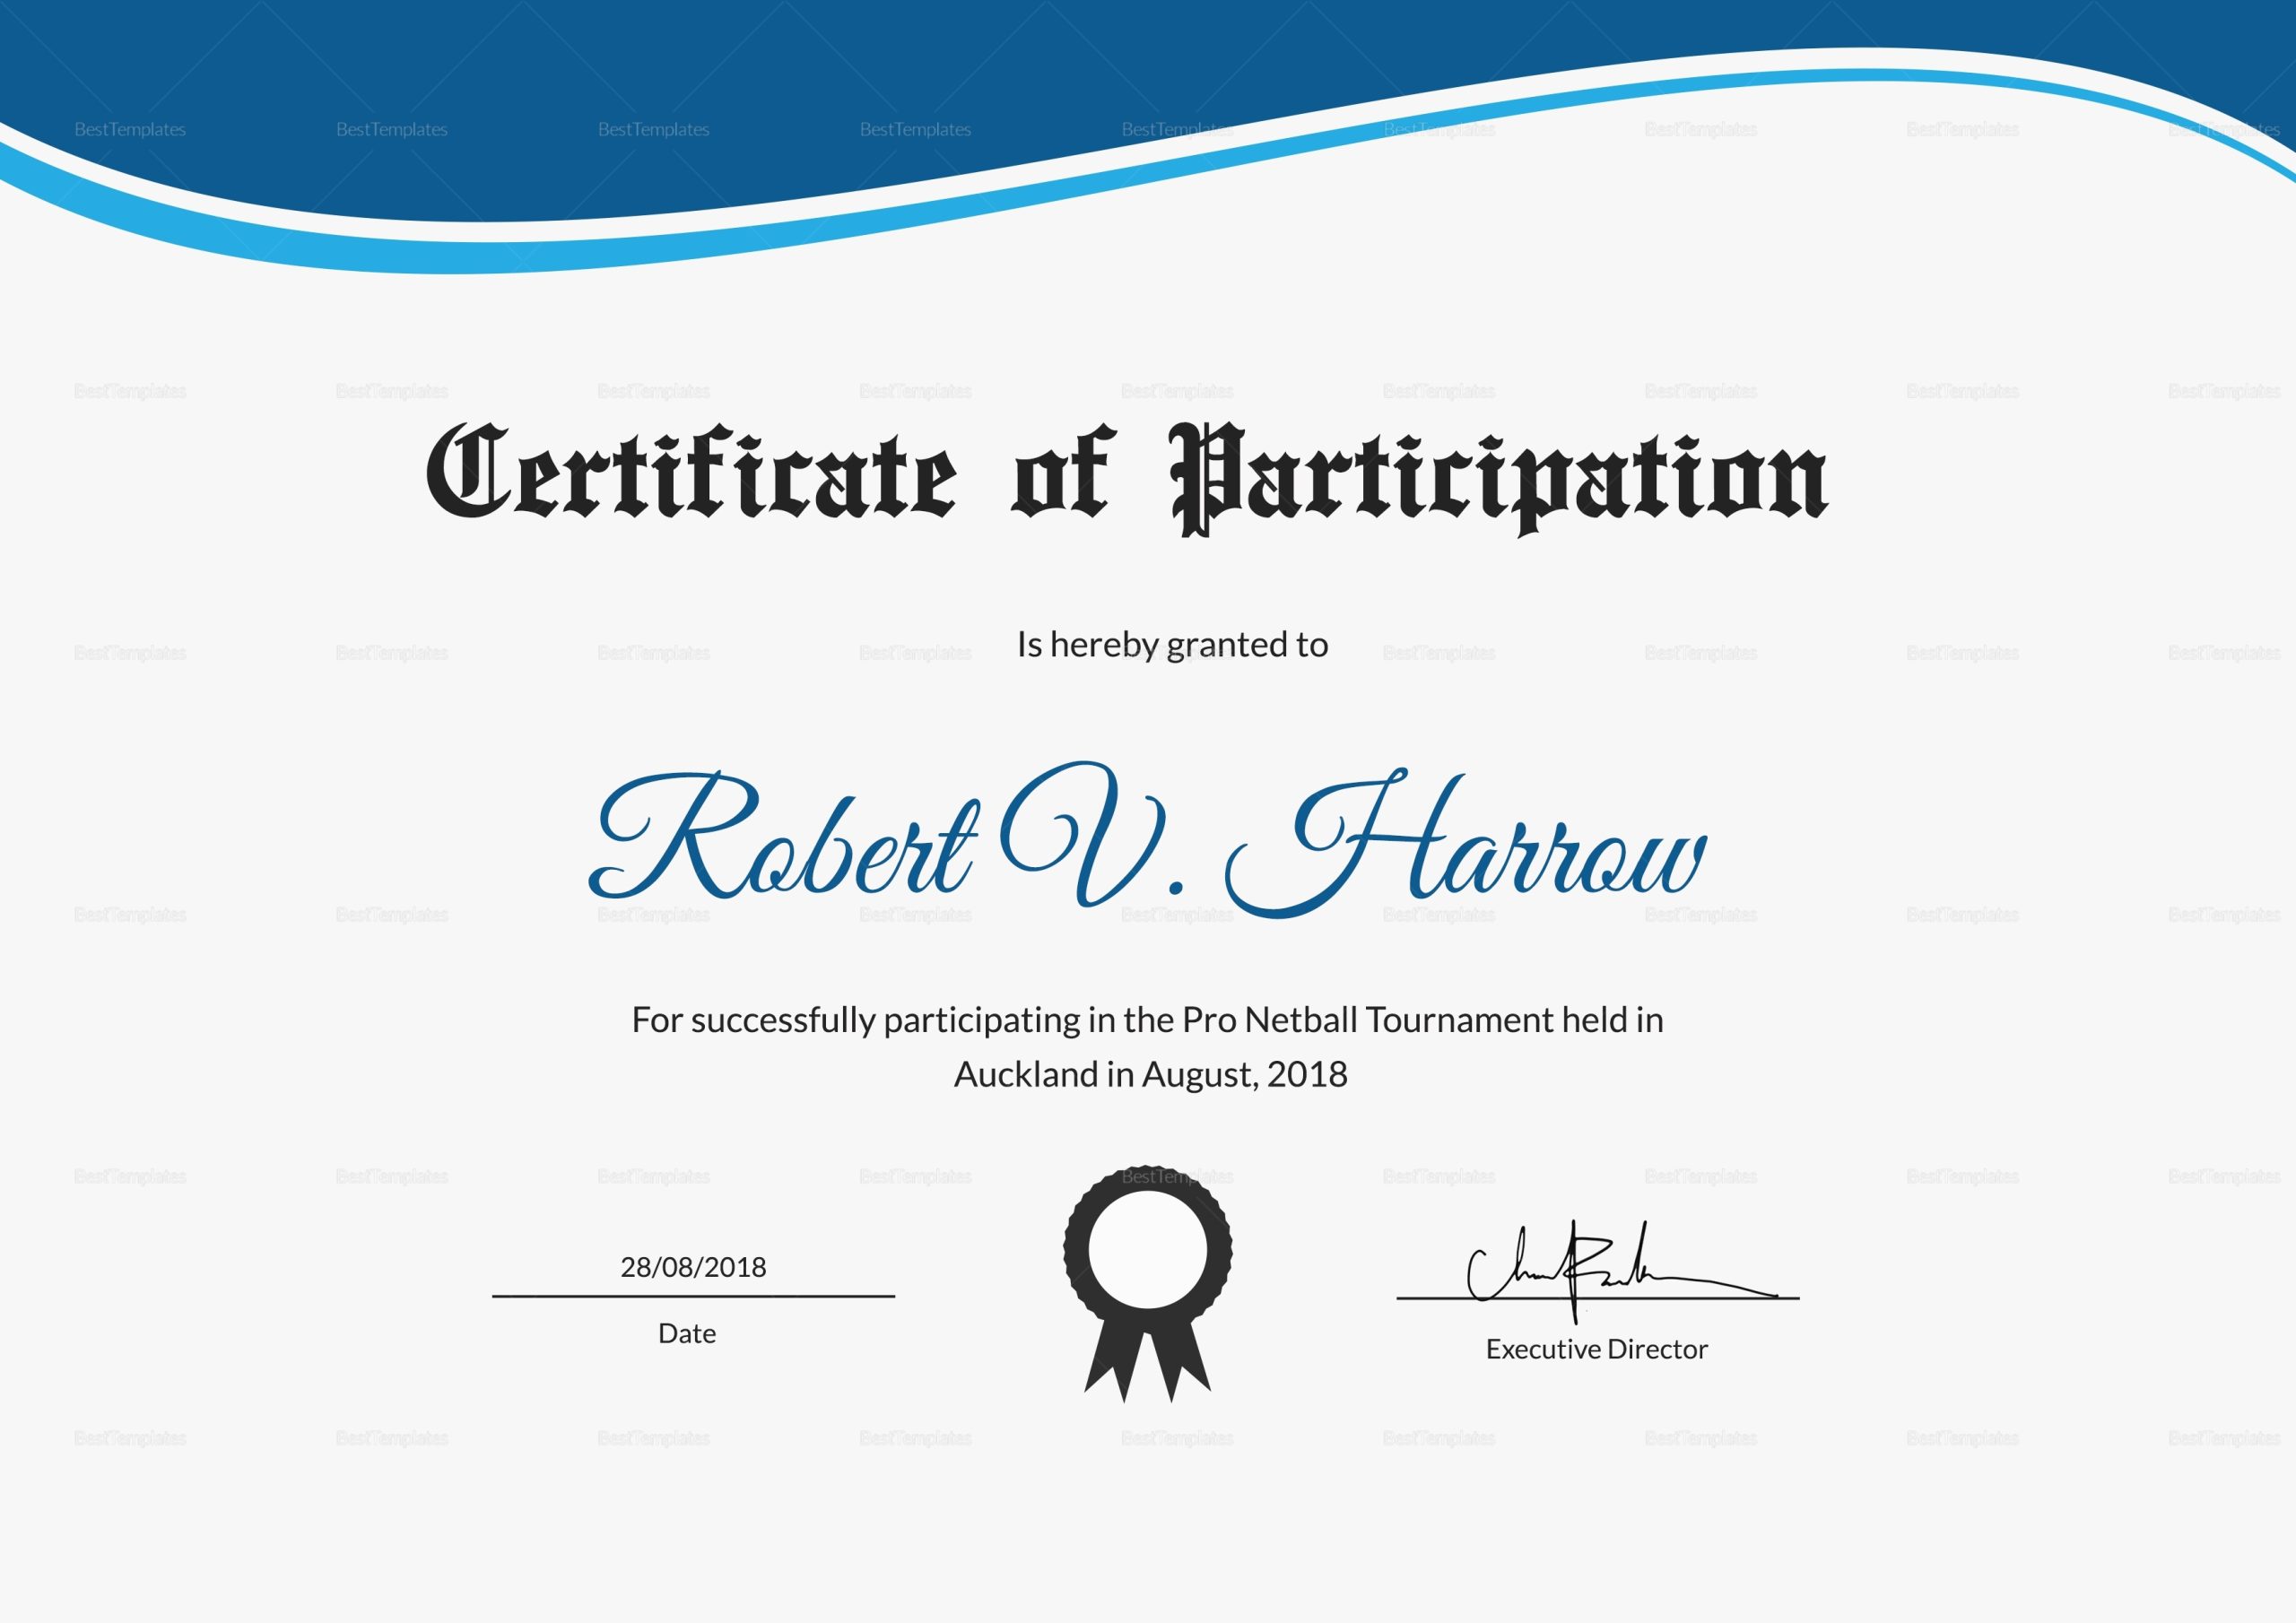 Certificate Of Participation Template Word | Creative Design Templates Inside Certification Of Participation Free Template